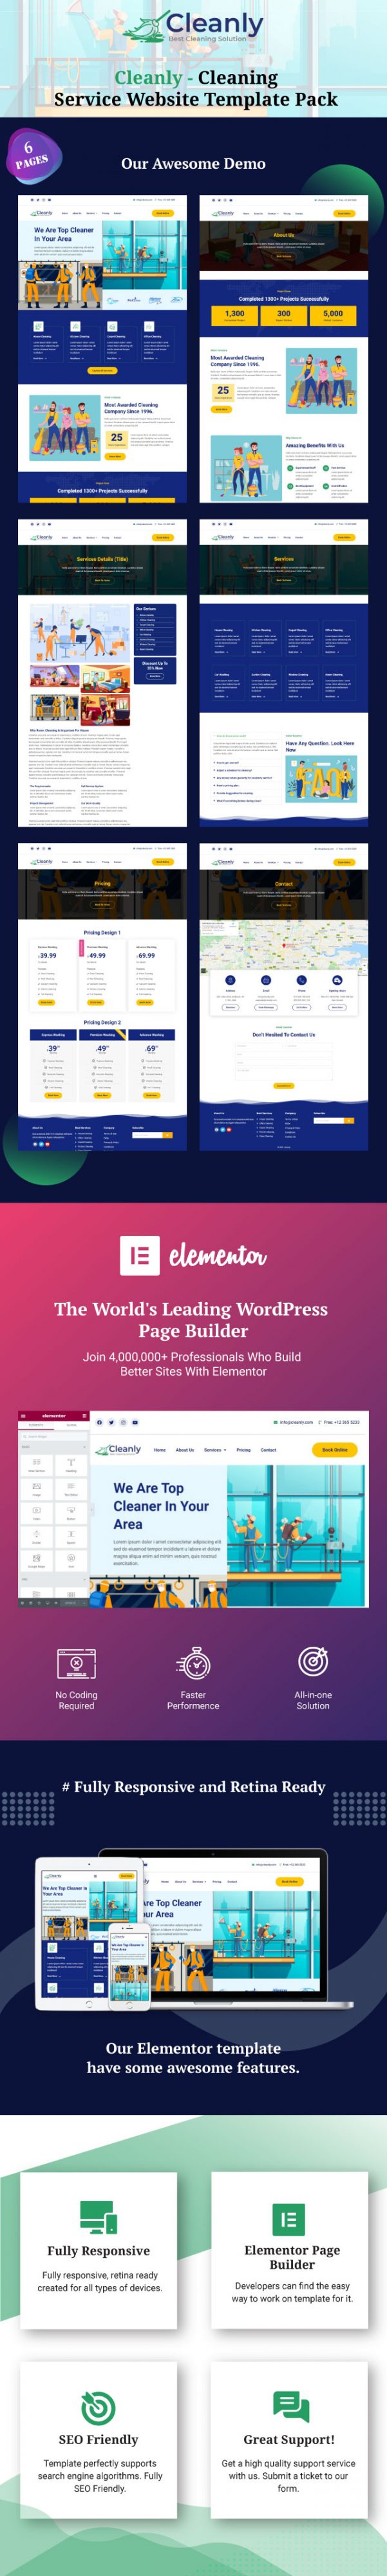 cleanly-cleaning-service-website-template-pack